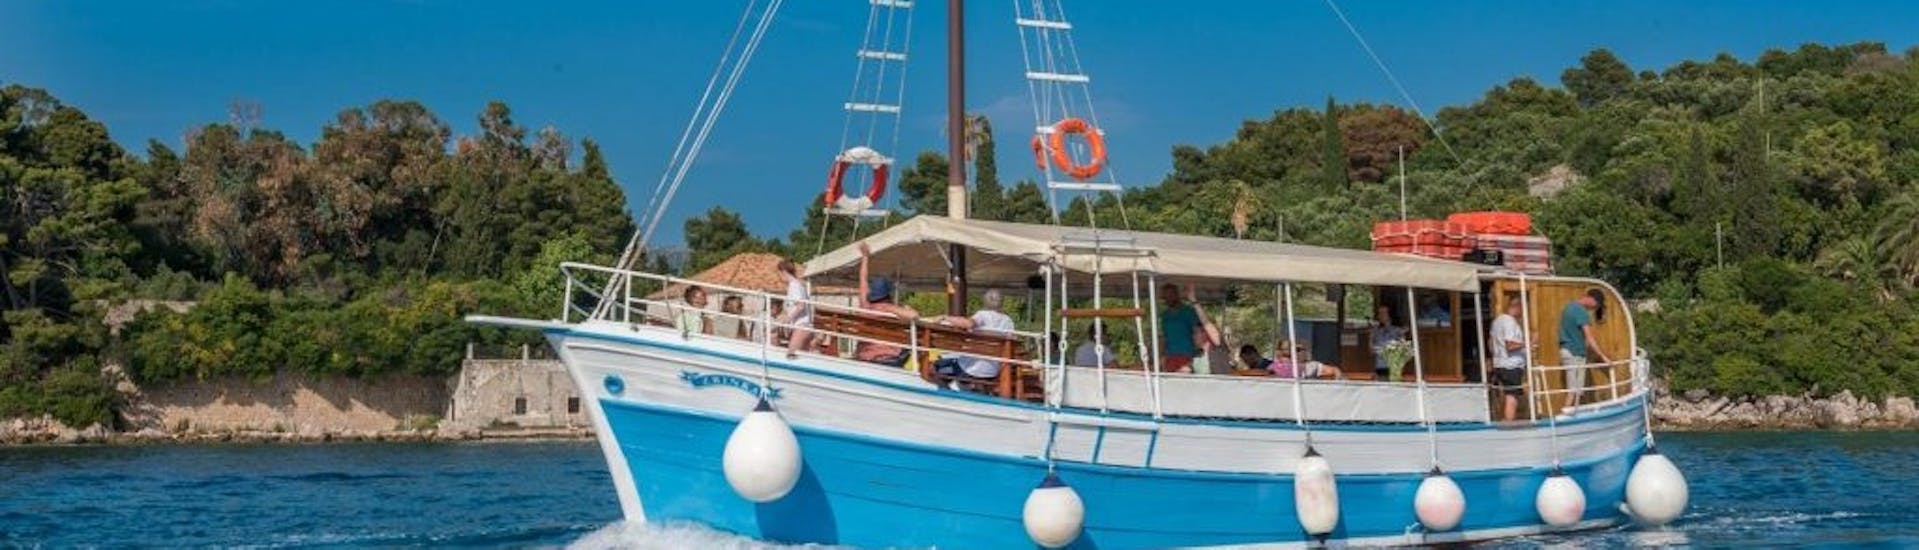 Picture of the boat from Dubrovnik Islands Tours during the boat trip to the Elaphiti Islands from Dubrovnik.